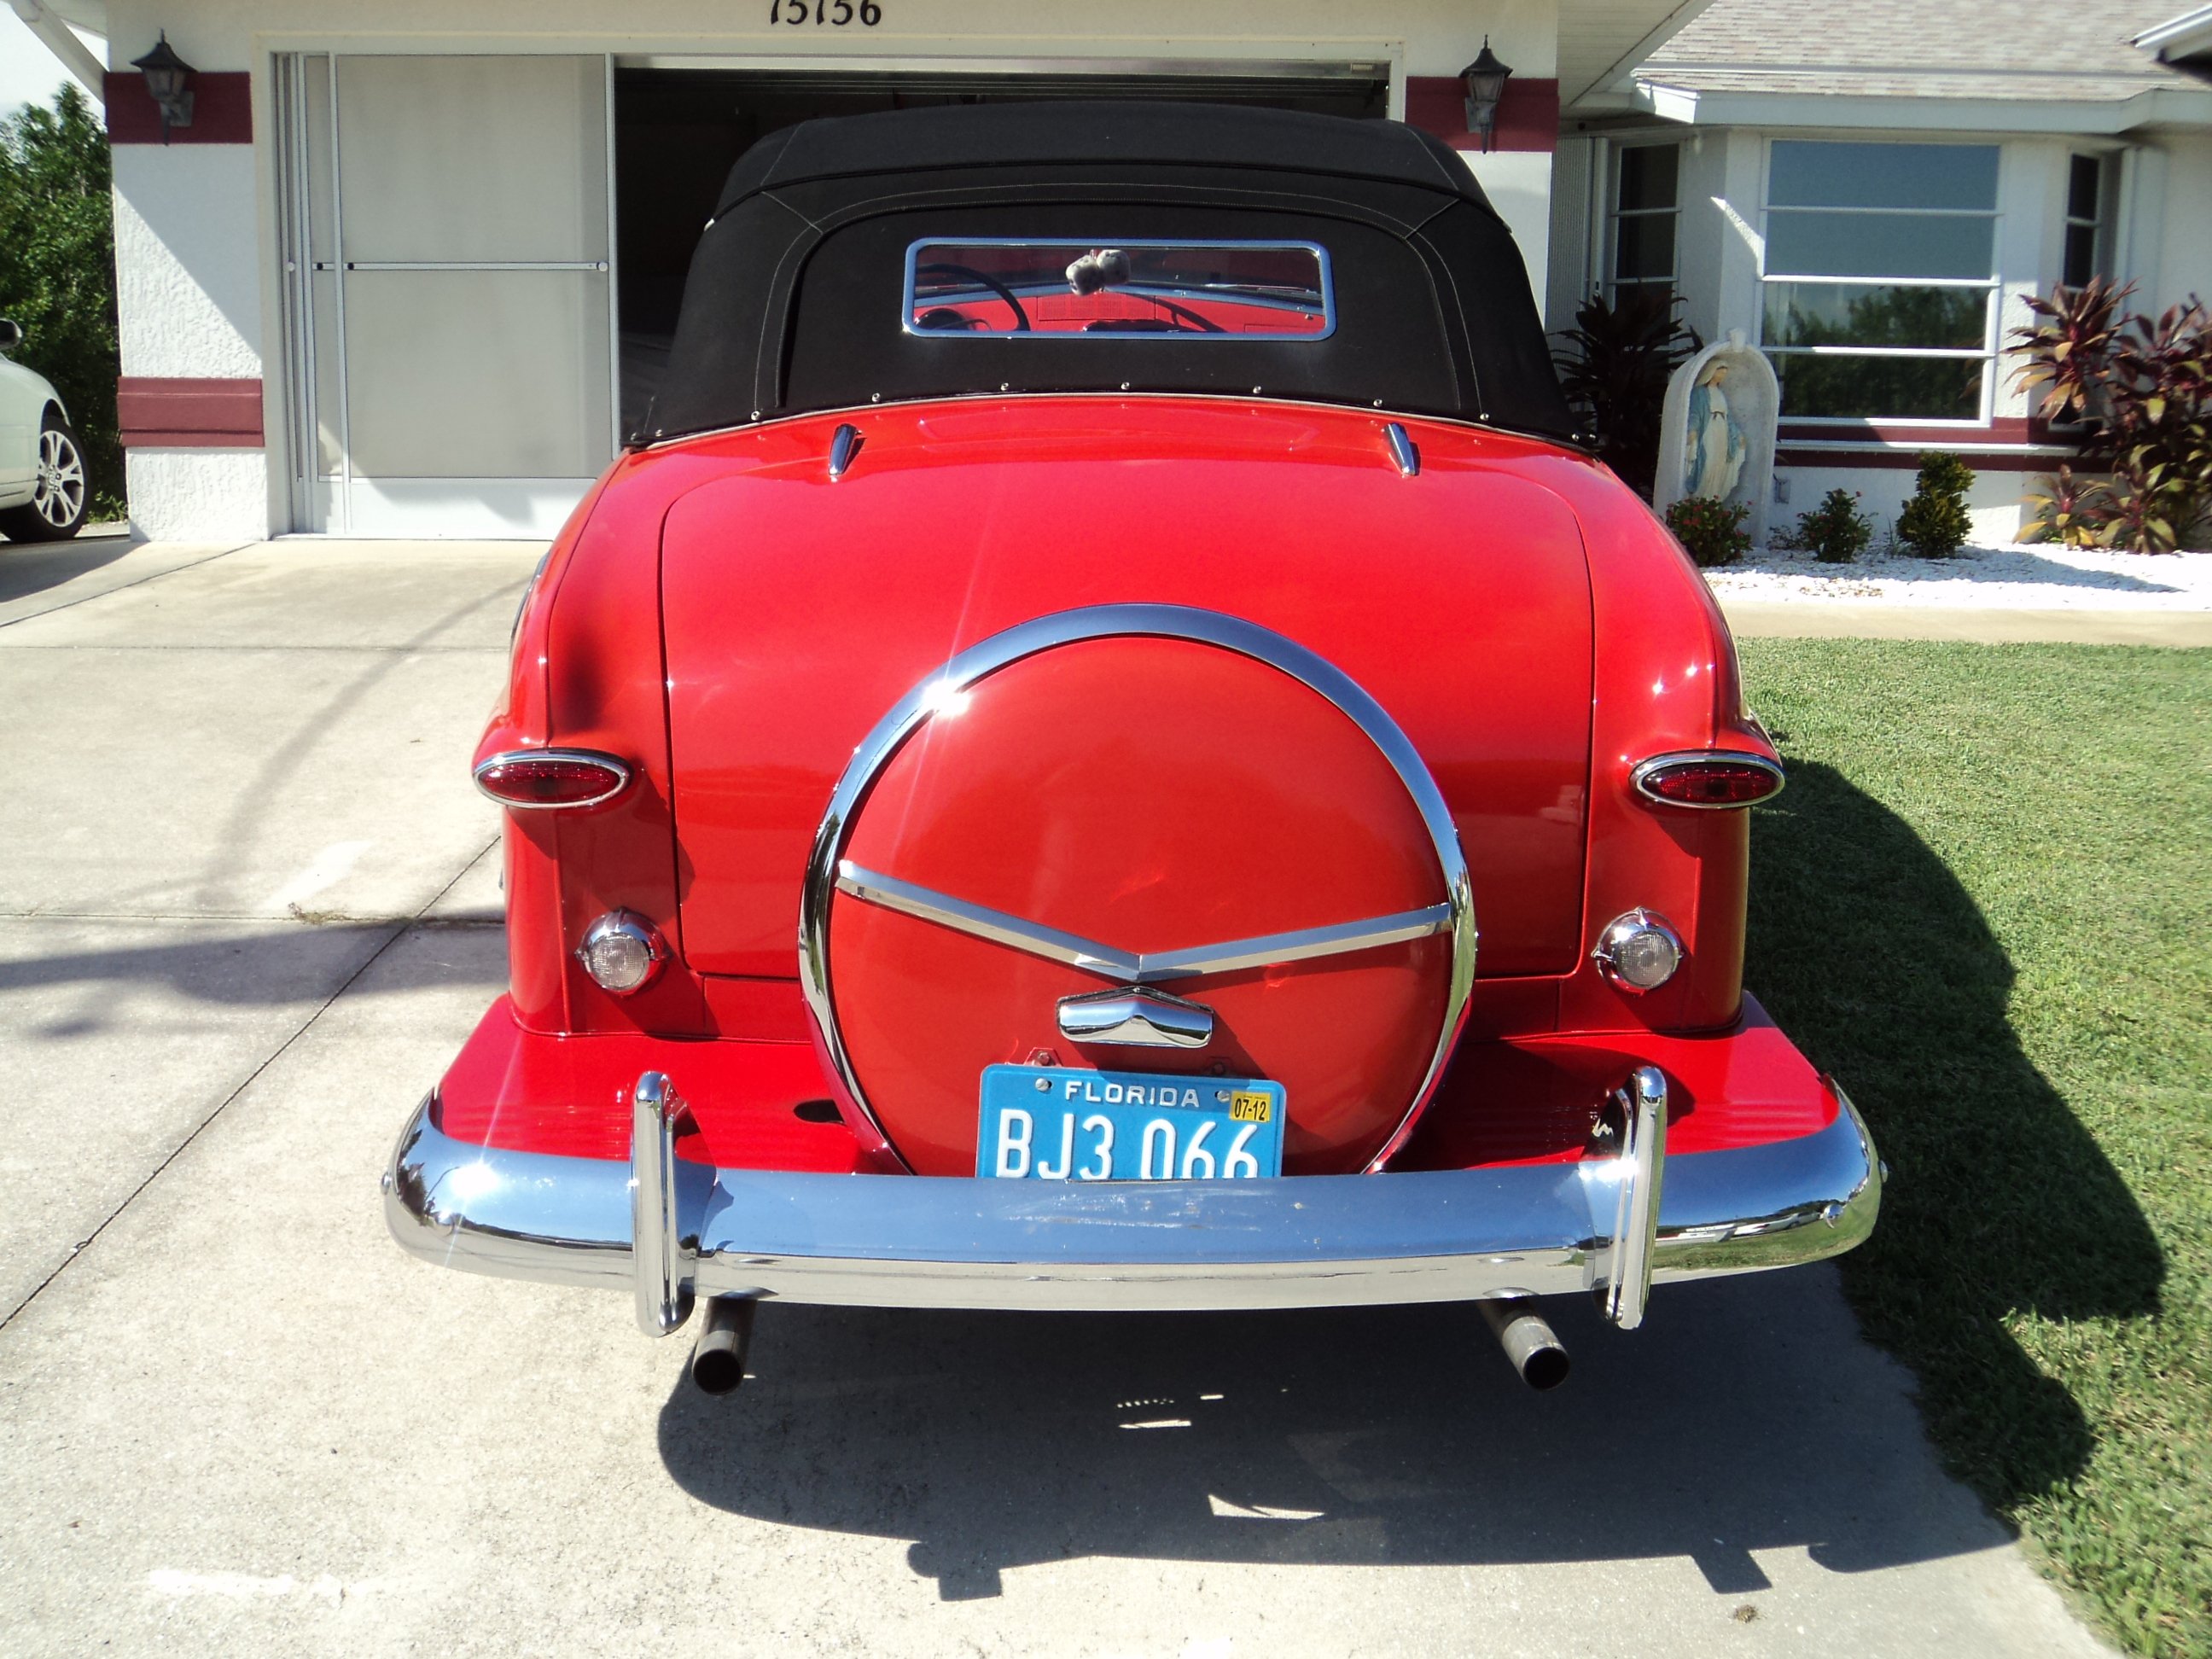 1950, Ford, Custonline, Deluxe, Convertible, Red, Classic, Old, Vintage, Original, Usa, 2592x1944 08 Wallpaper